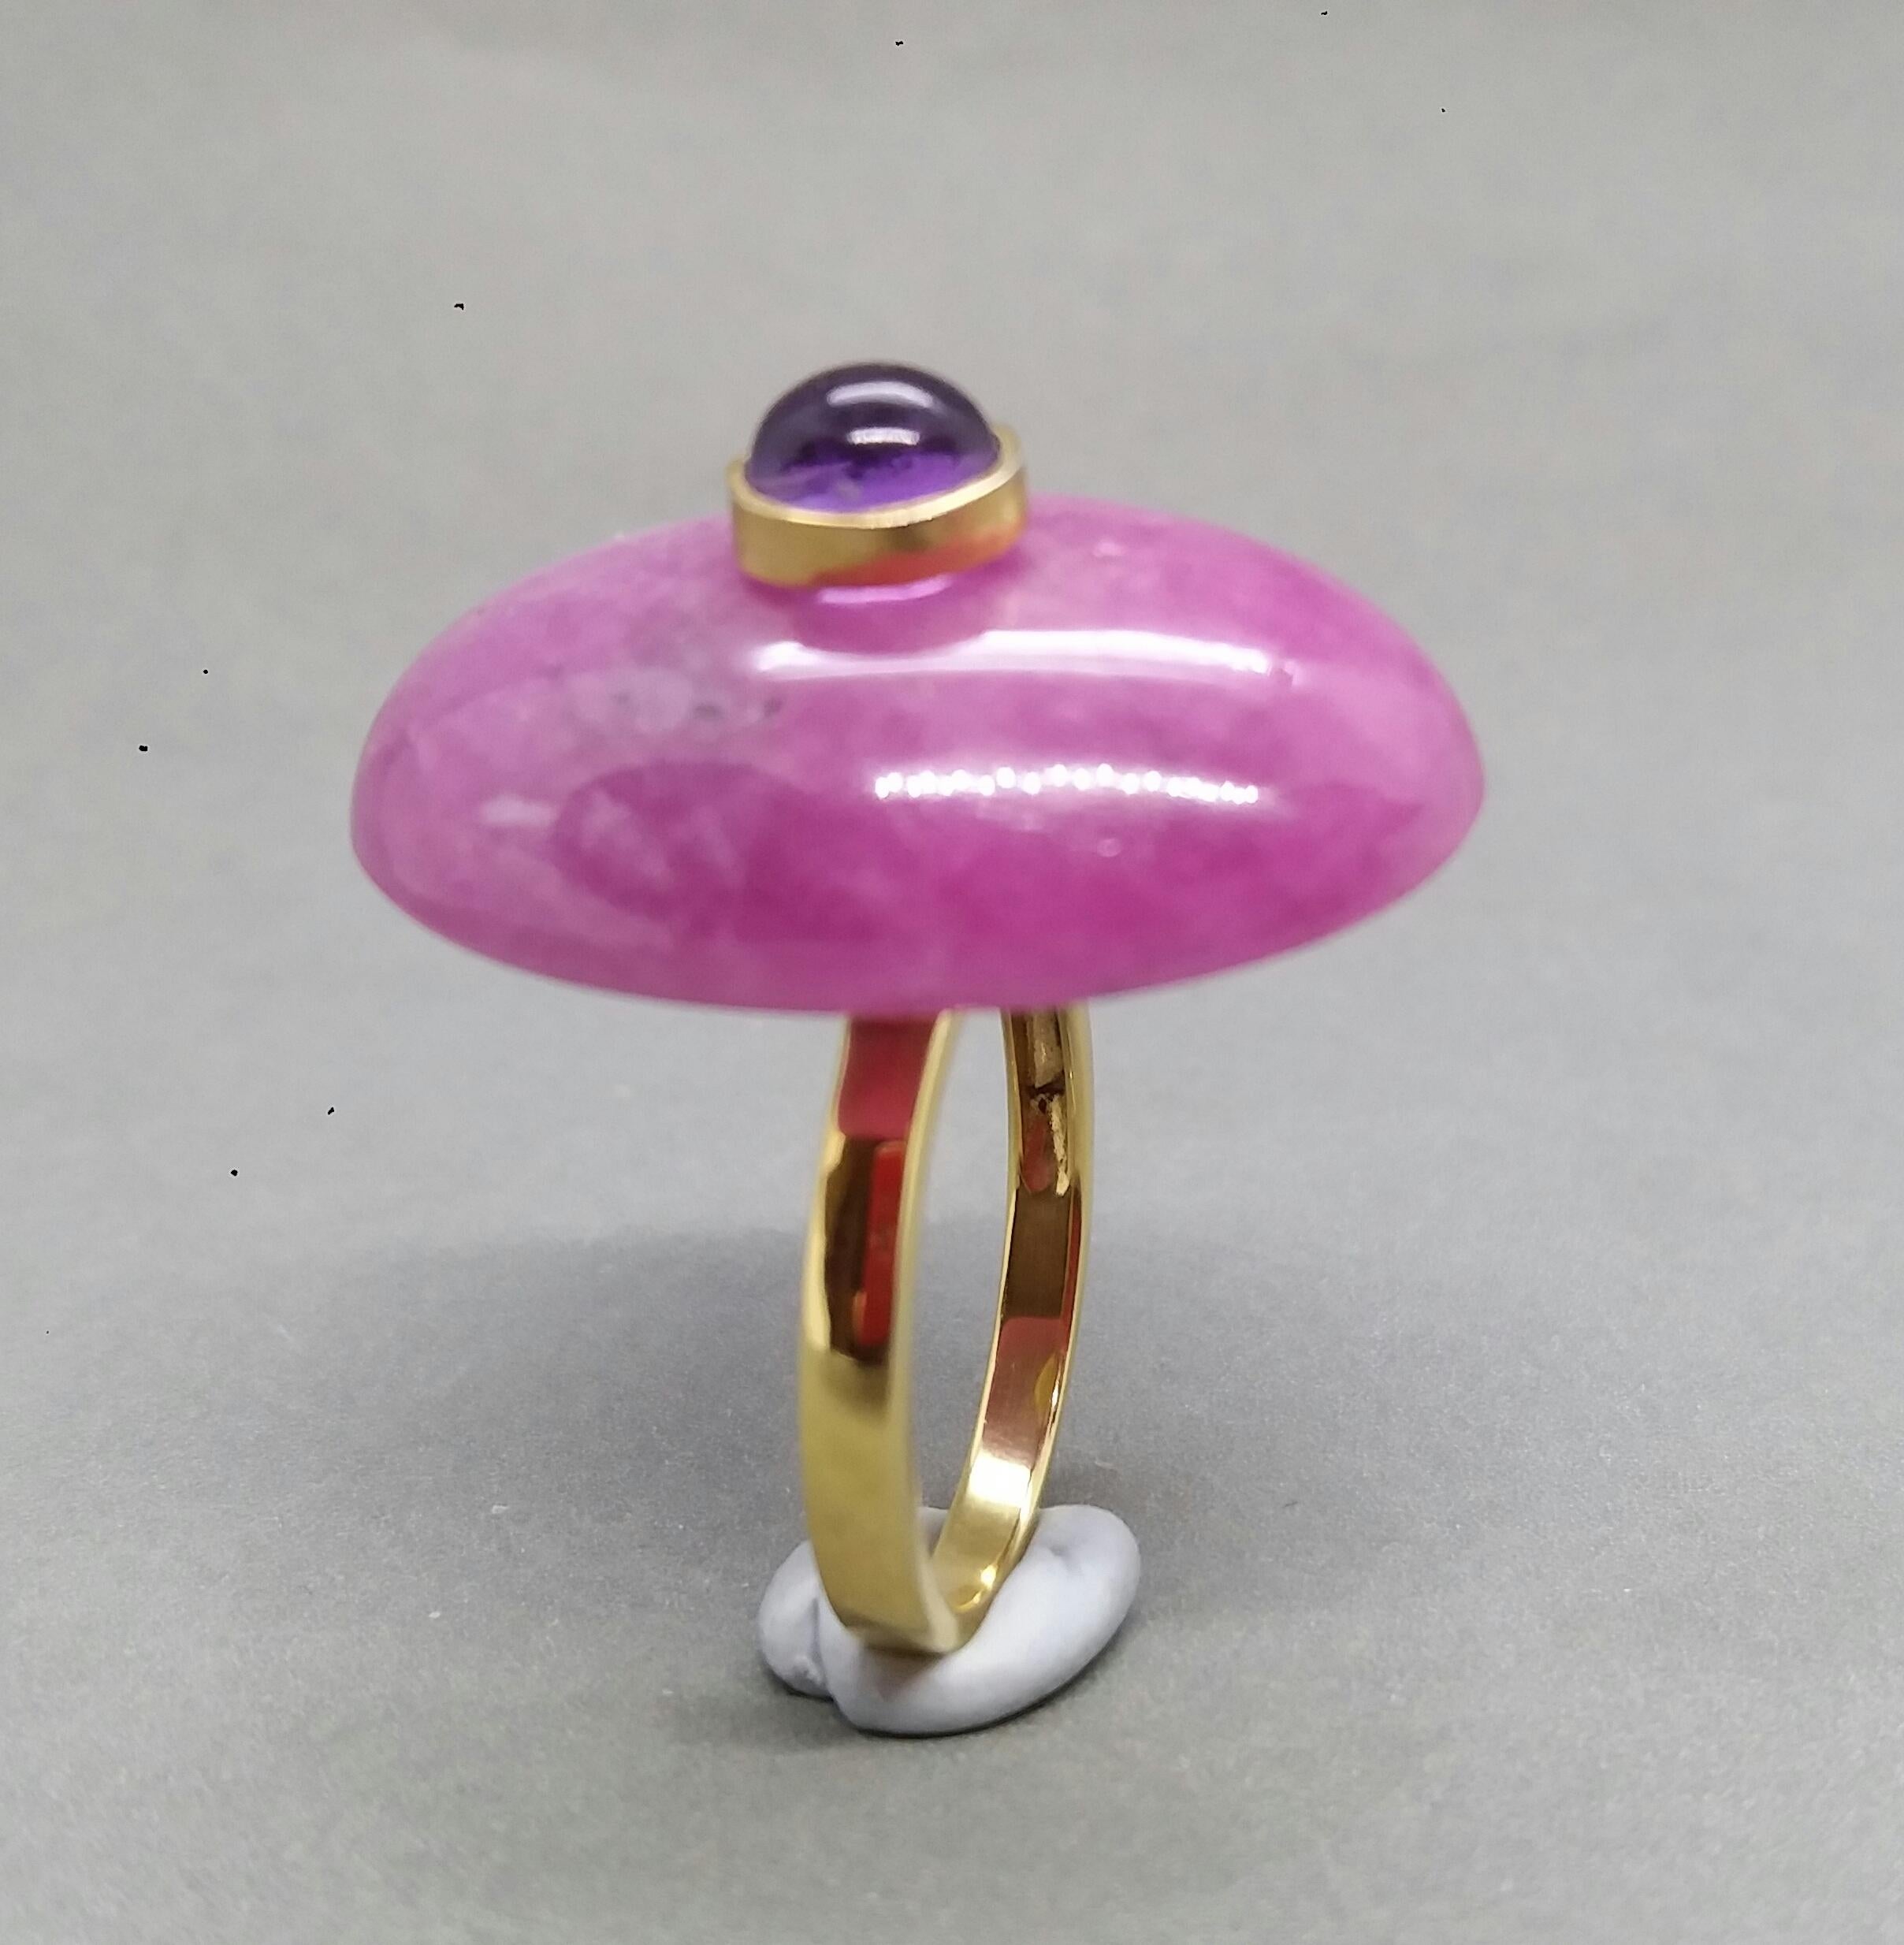 Unique ring with a Big Oval Shape Natural  Ruby,measuring 28 mm. x 20 mm x 6mm. and weighing 55 Carats with a Round Amethyst Cab measuring 6 mm in diameter set in 14 kt yellow gold bezel...Ring shank is also in 14 kt  solid yellow gold now in